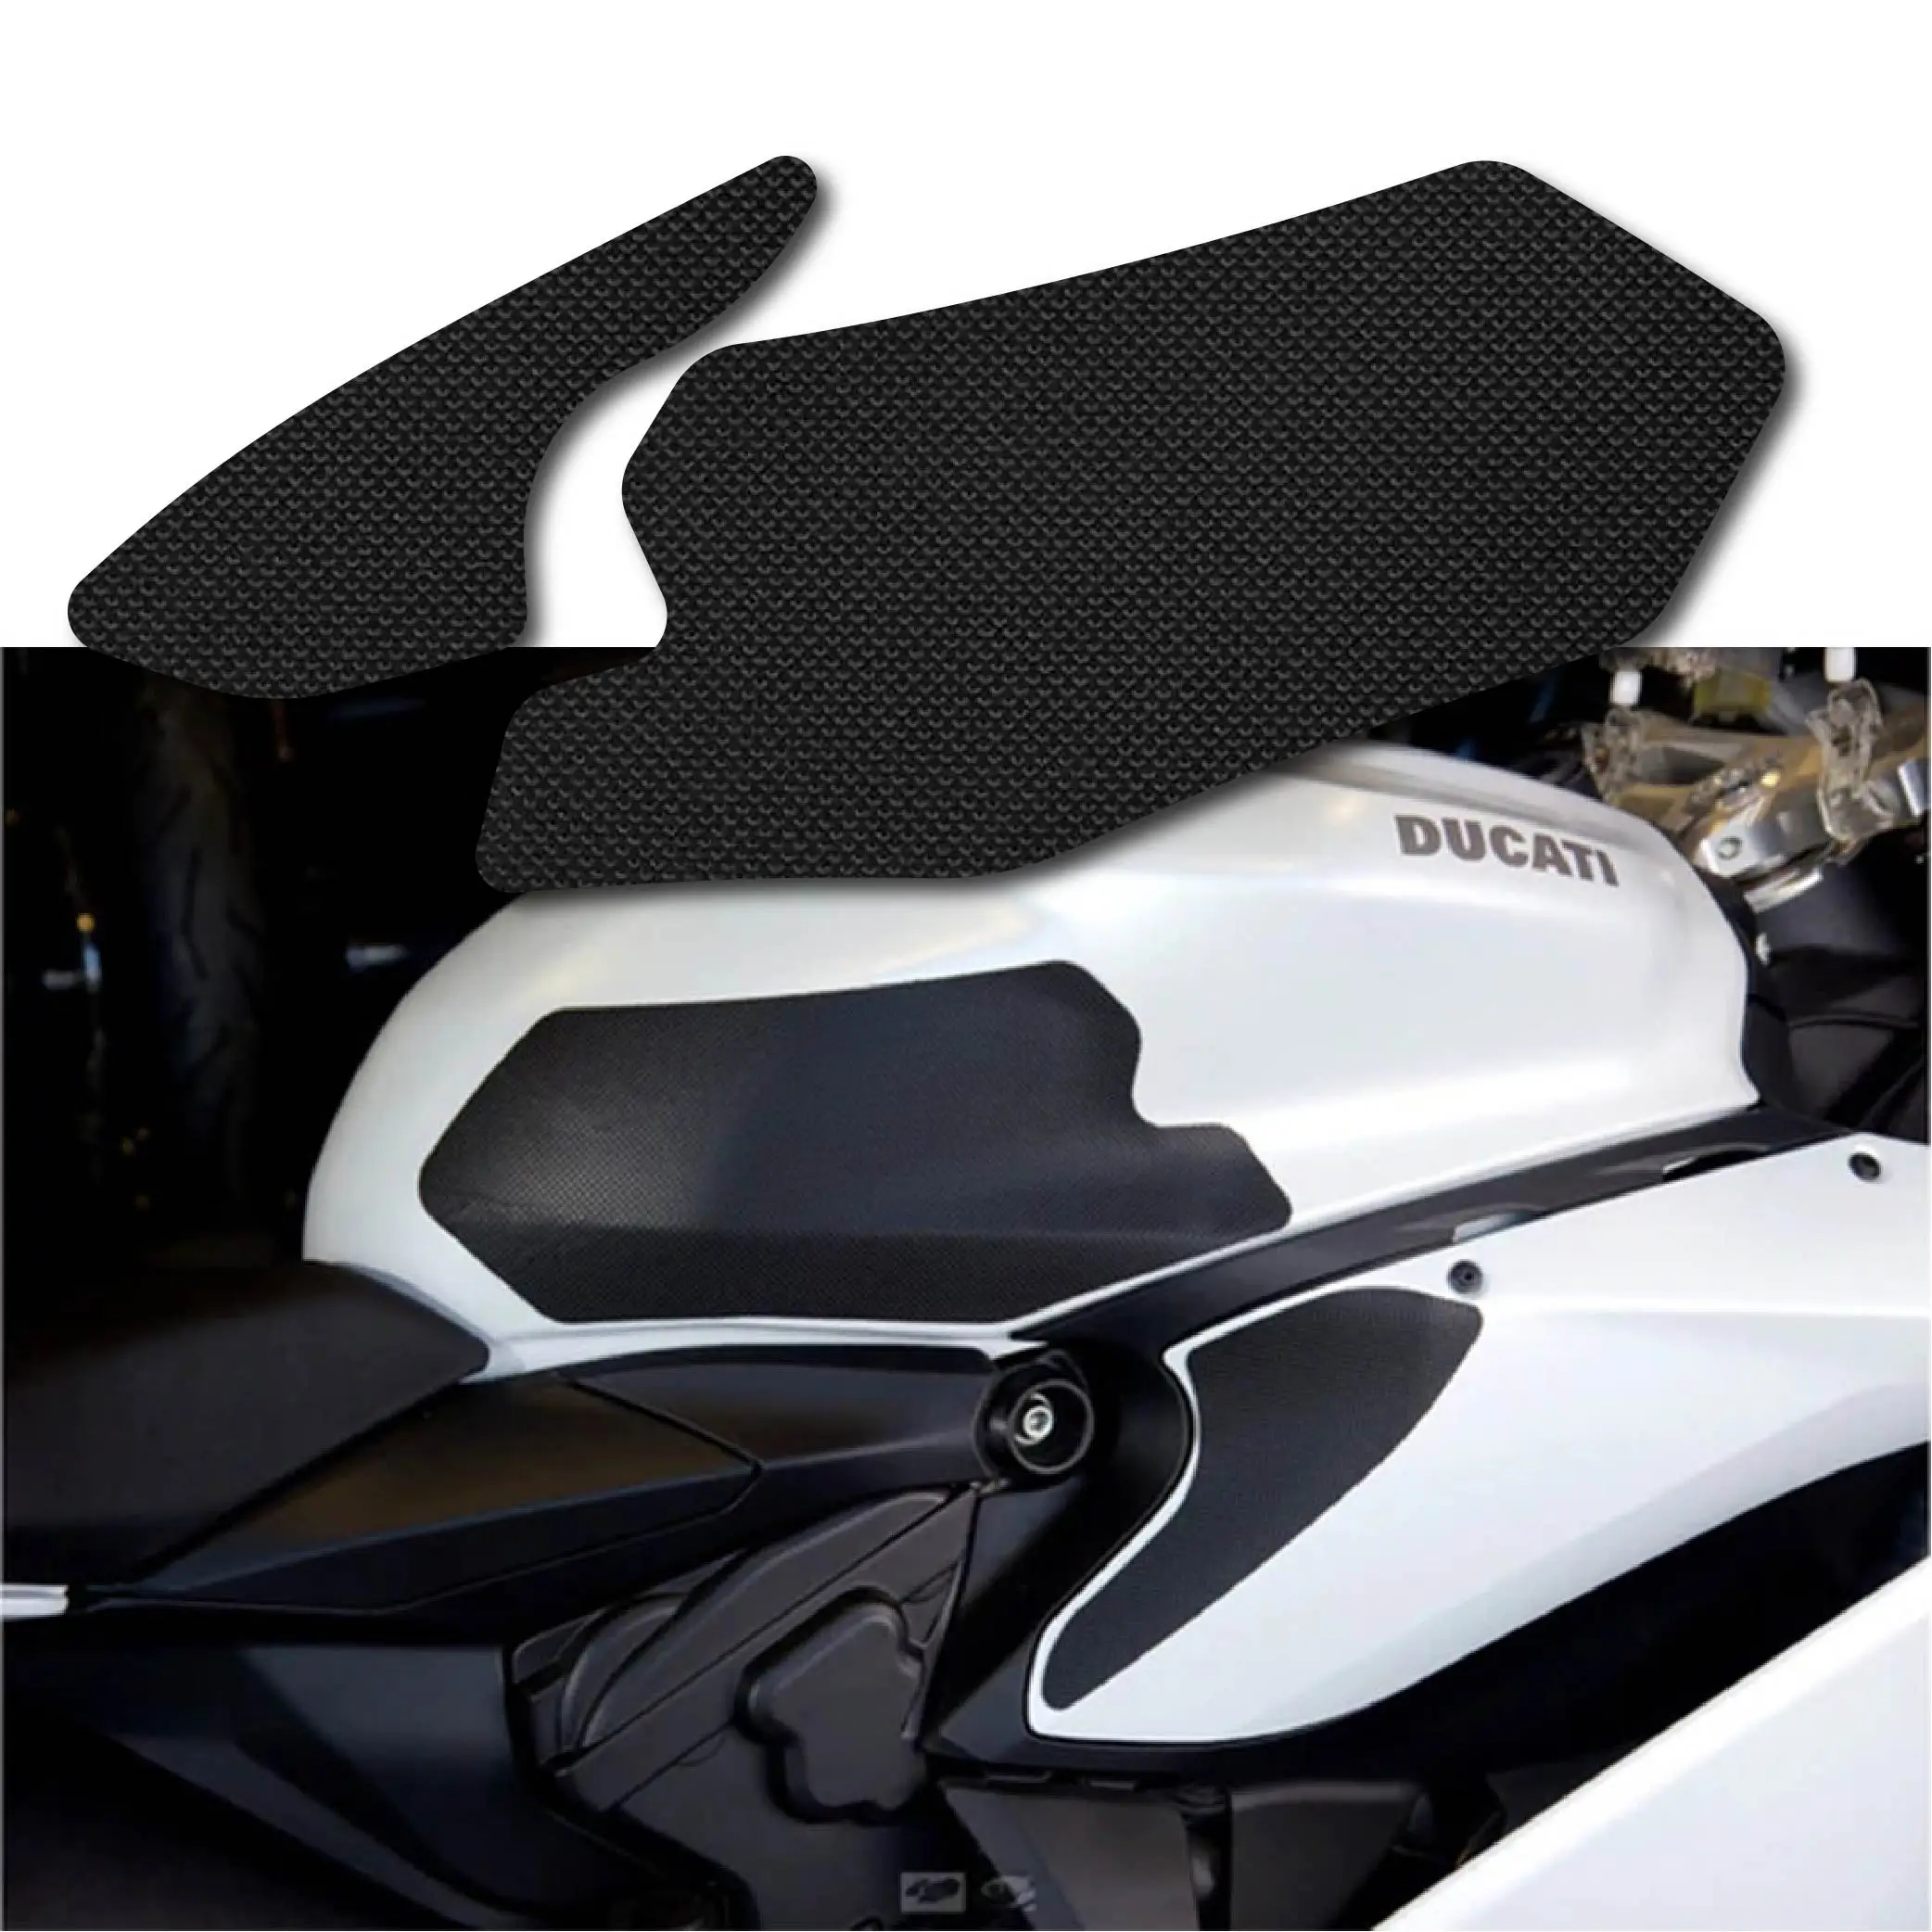 

For DUCATI 899 959 1199 1299 PANIGALE 2011-2018 3M Self Adhesive Silicone Non-SlipTank Pads Traction Grips 3D Rubber